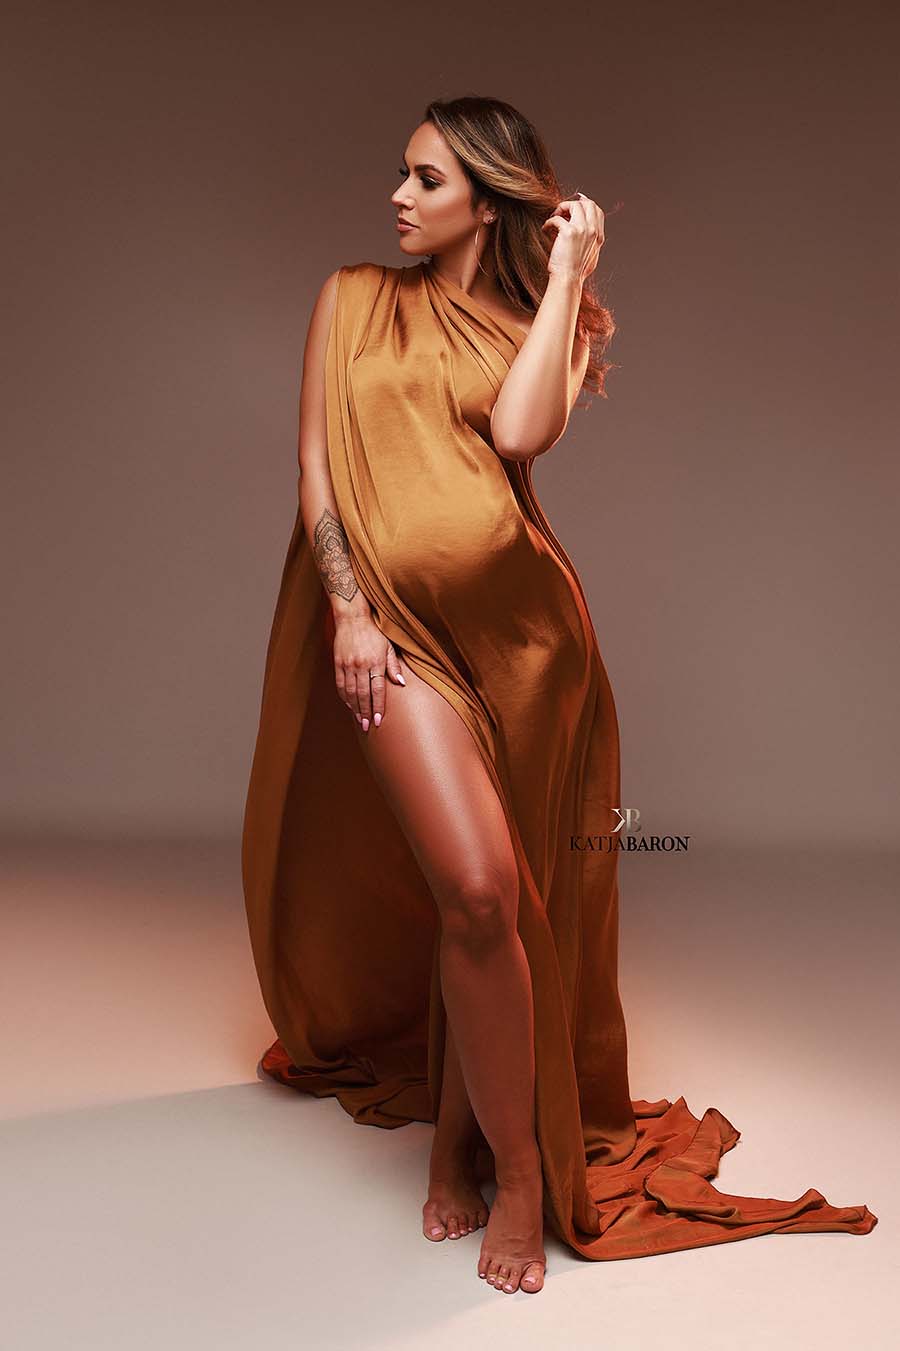 Pregnant model poses in a studio wearing a scarf to cover her body partially. The scarf is cognac camel color and made of silk. She looks to the side and touches her hair.